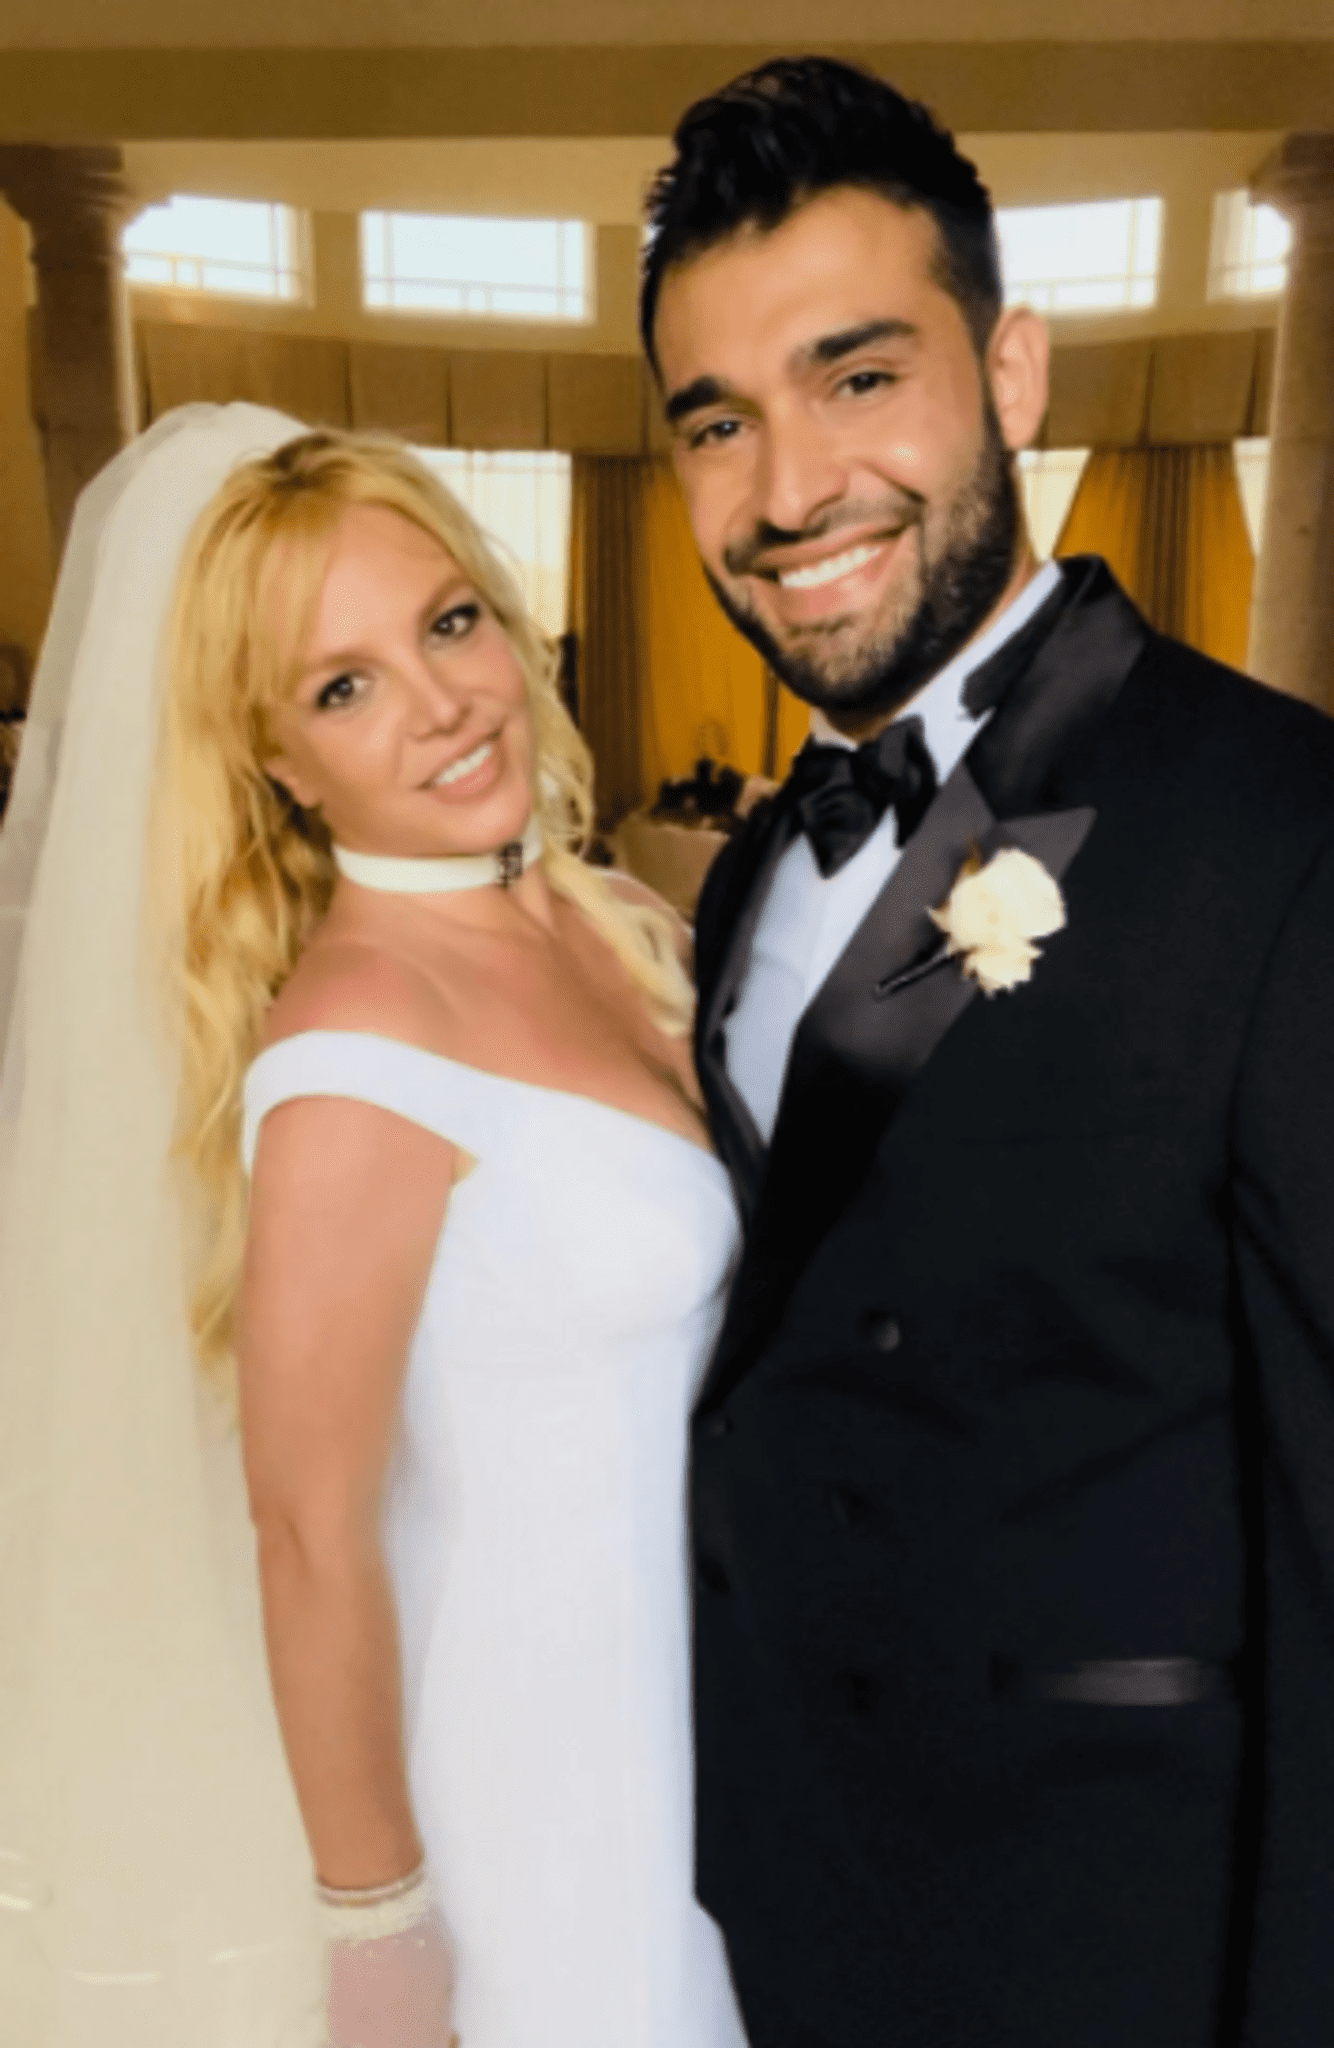 ”britney-spears-married-sam-asgari-the-first-details-of-the-sensational-wedding-ceremony”